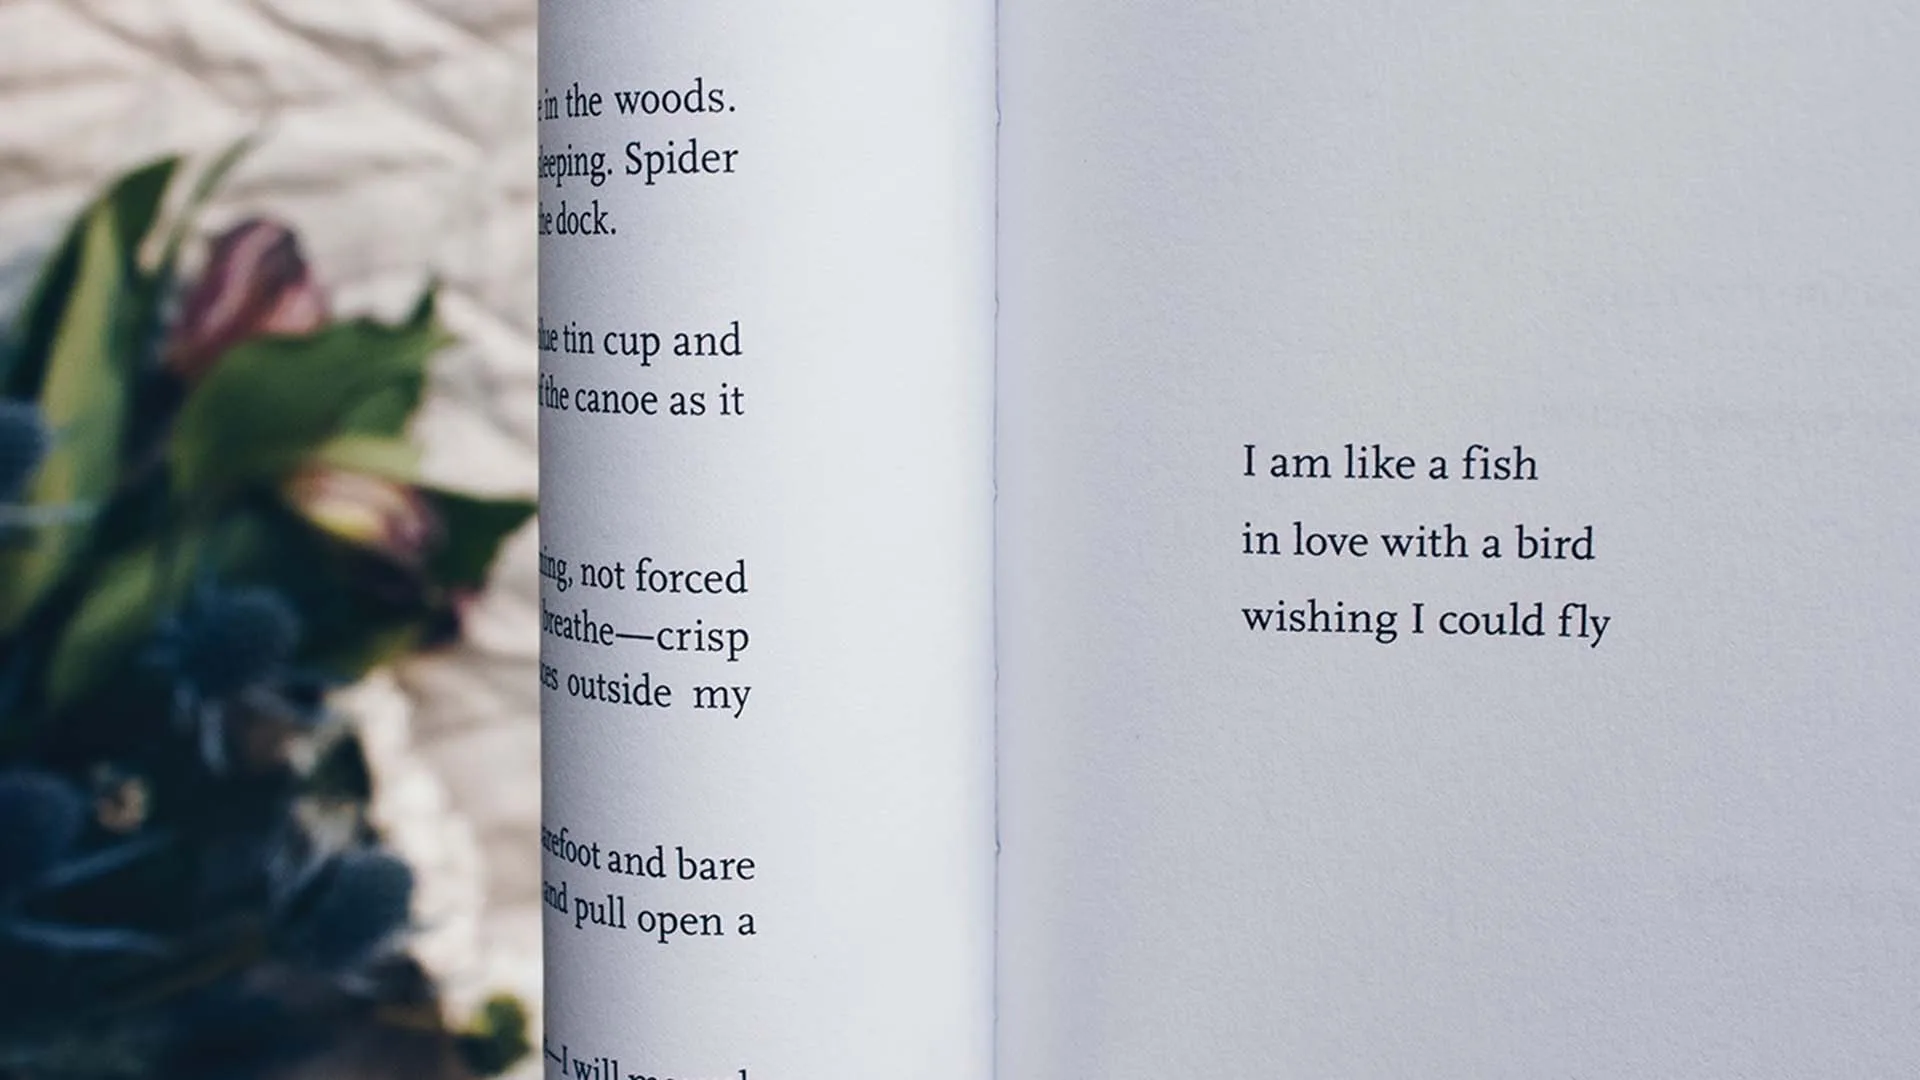 A book with a poem